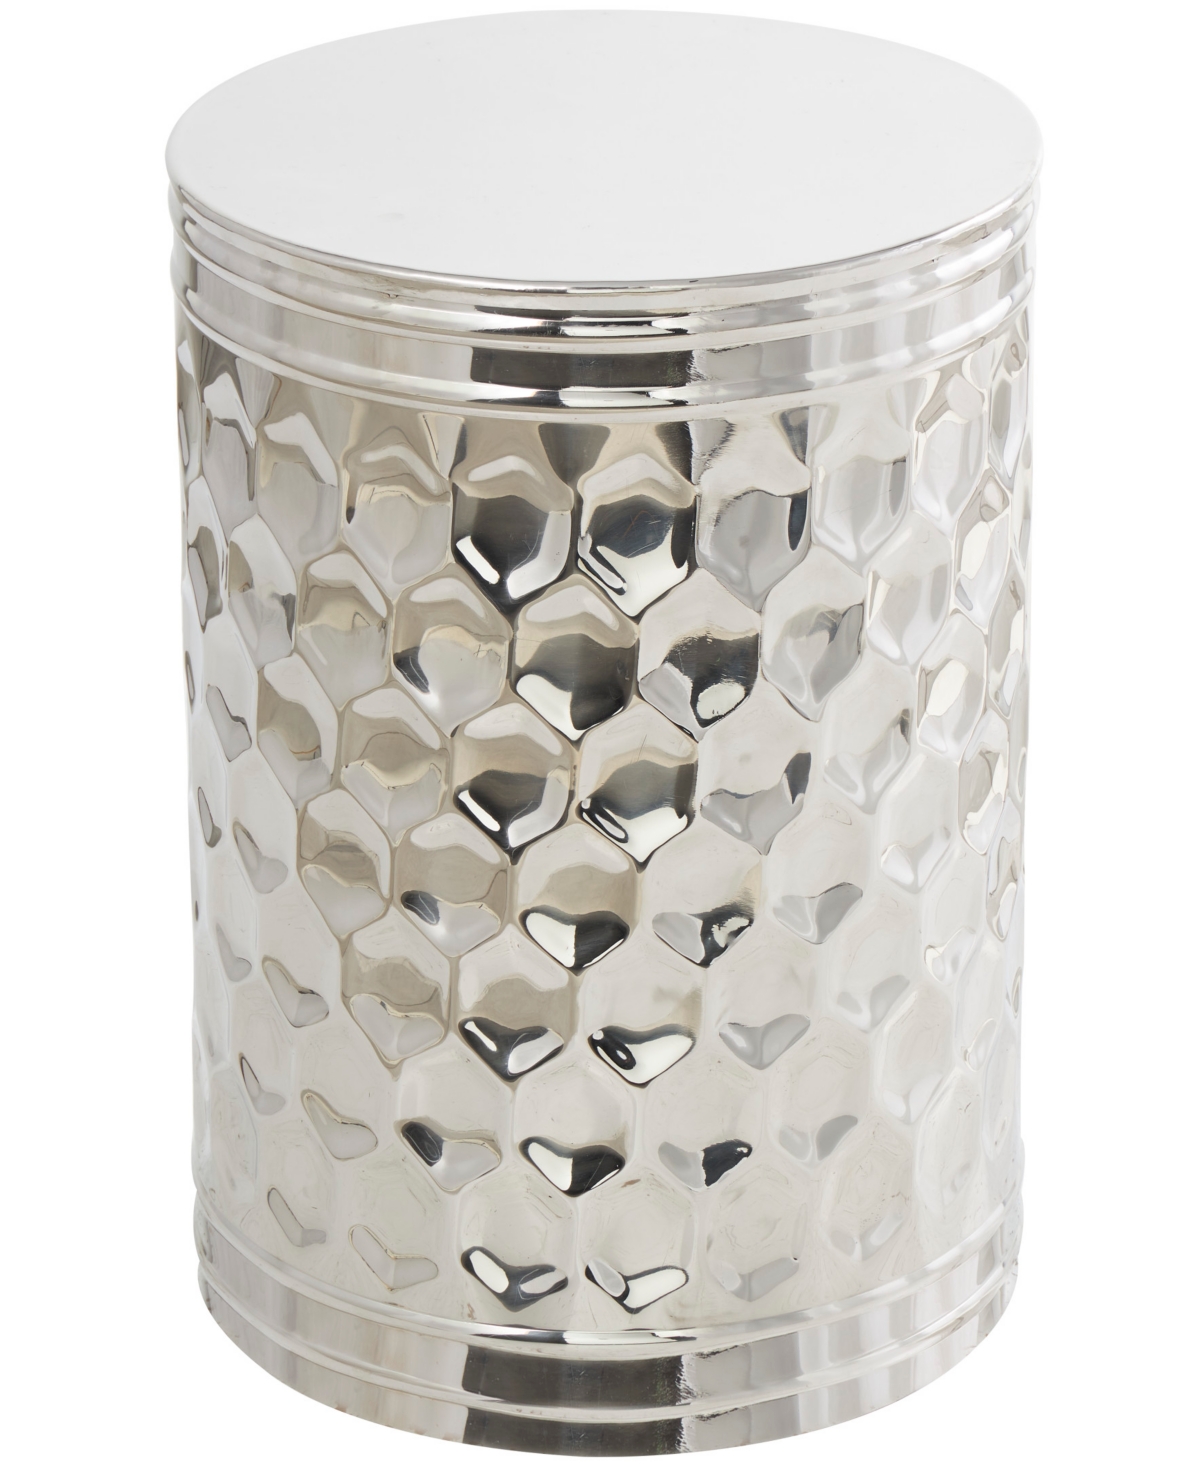 Rosemary Lane 18" Stainless Steel Drum Geometric With Hexagon Patterned Exterior Accent Table In Silver